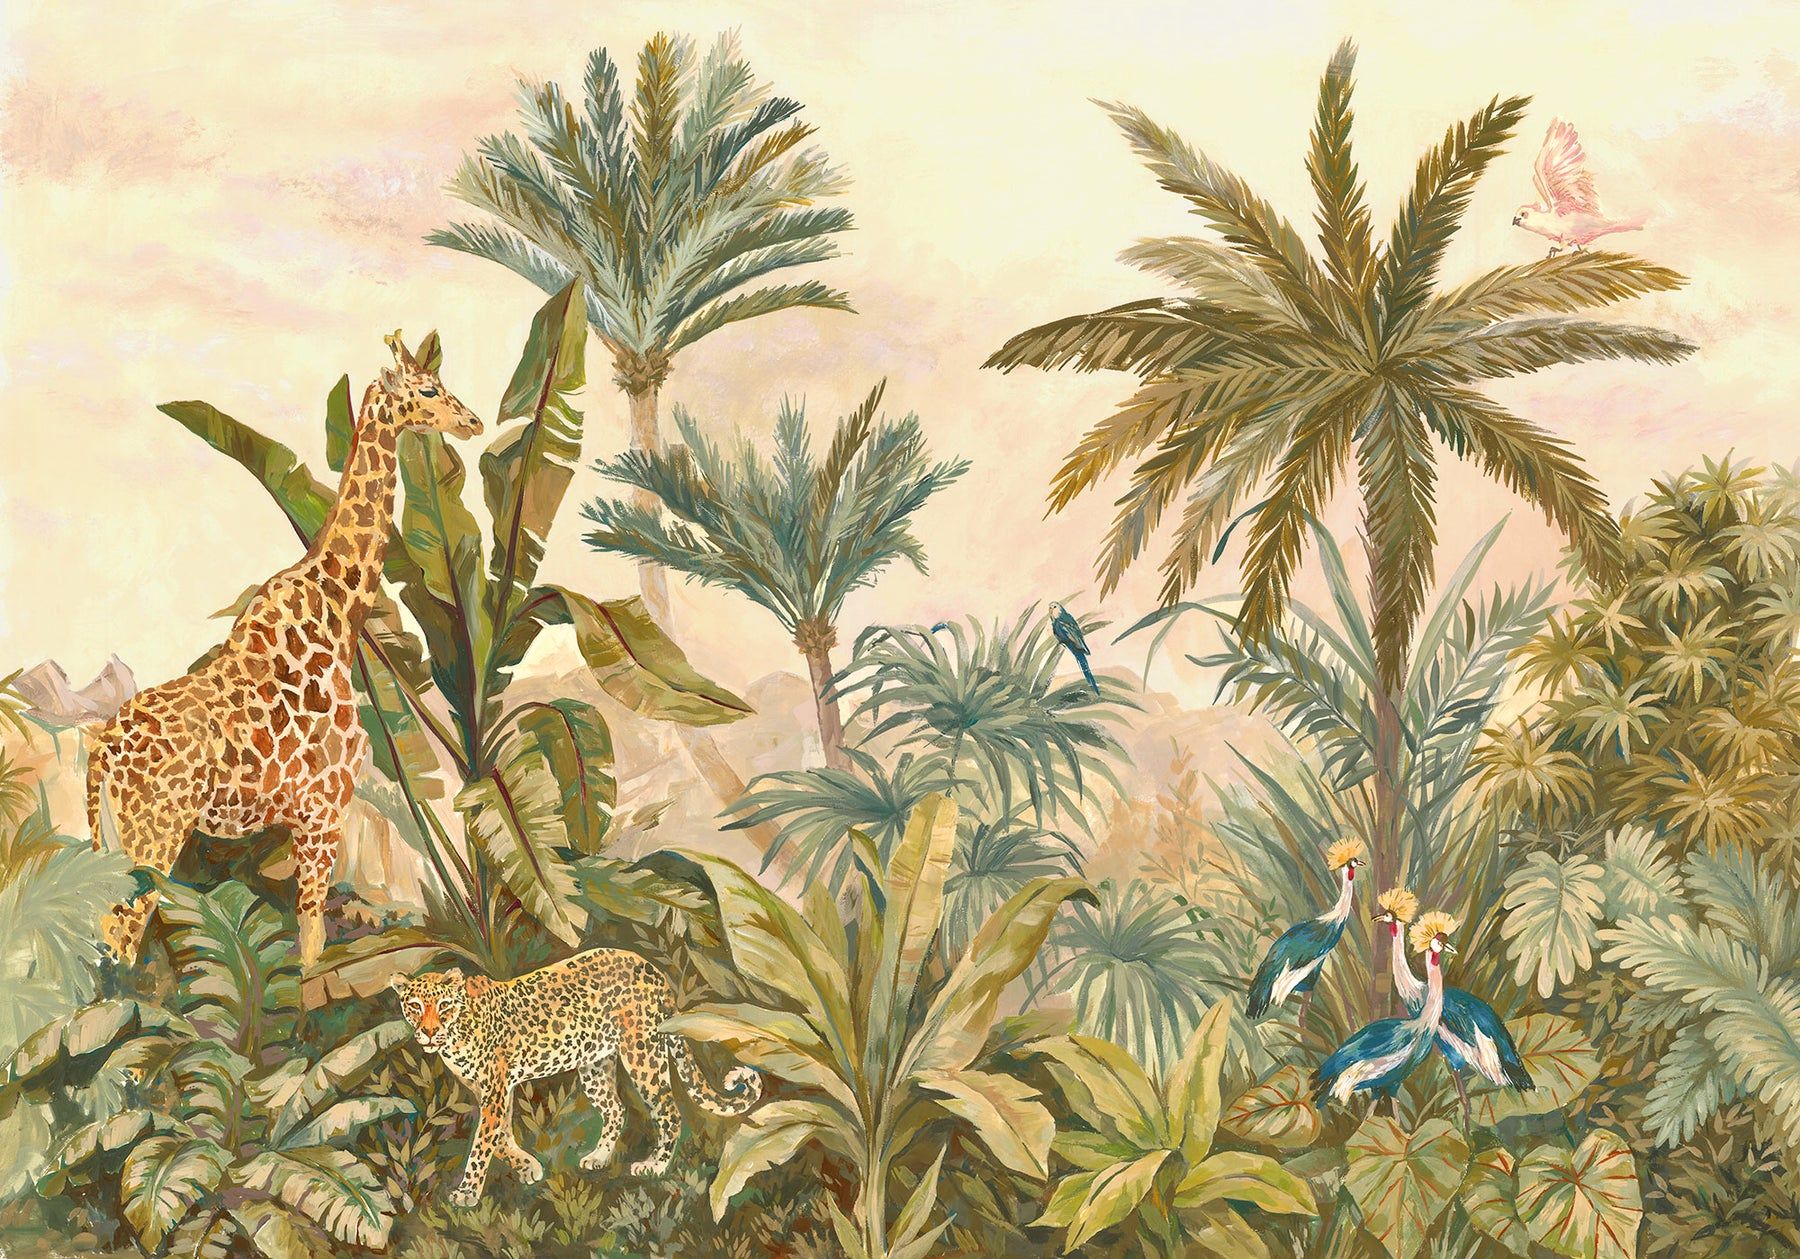 A painting of a giraffe, leopard, and birds in a jungle - Jungle